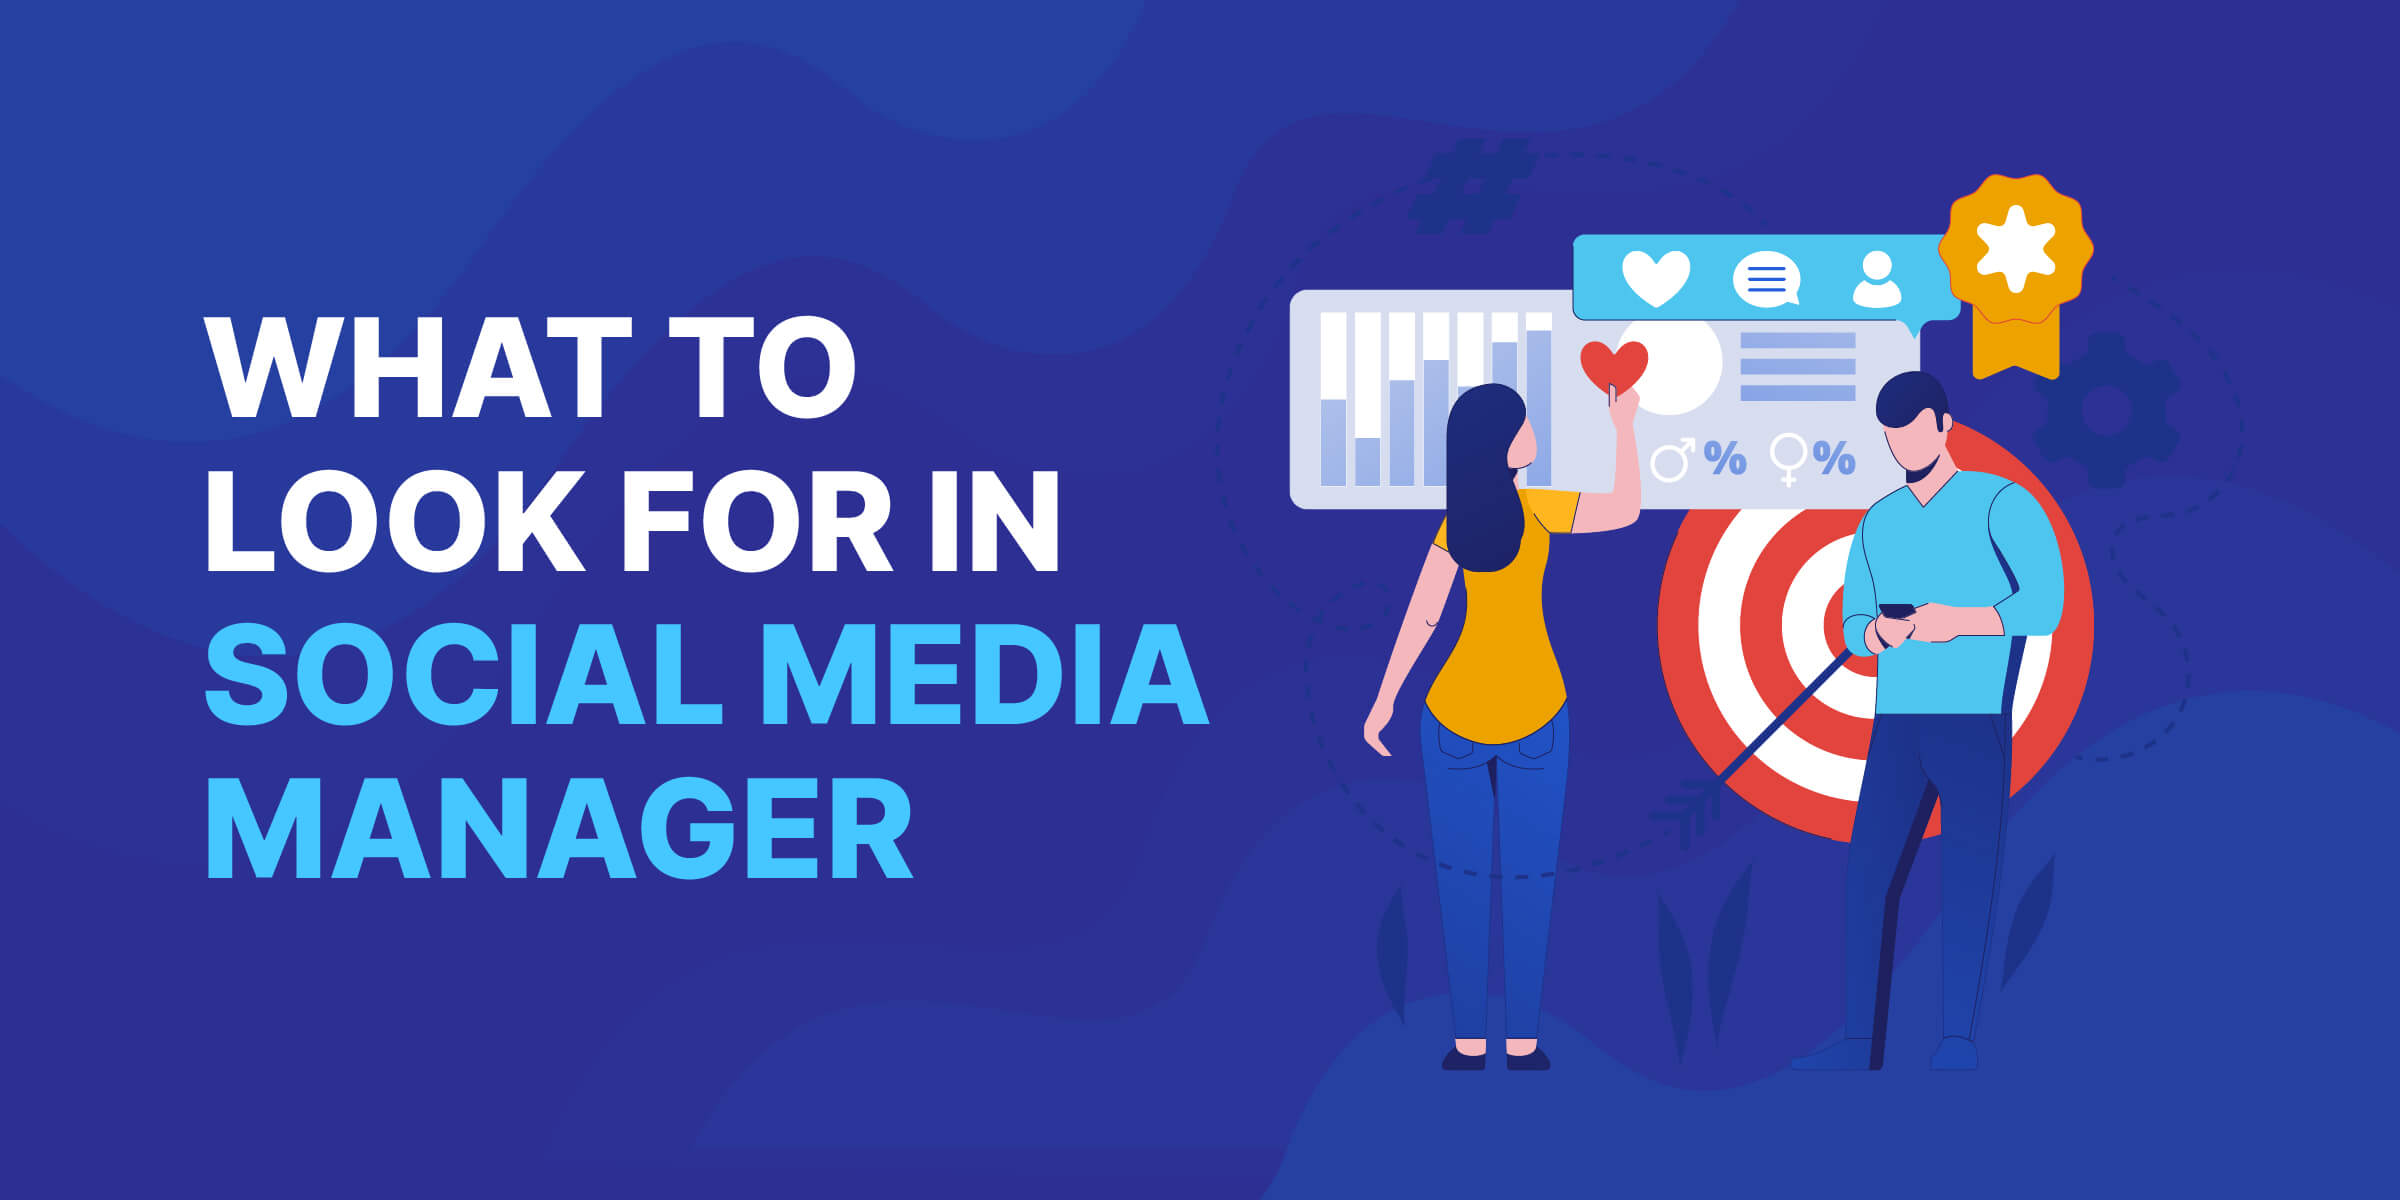 What to Look for in Social Media Manager